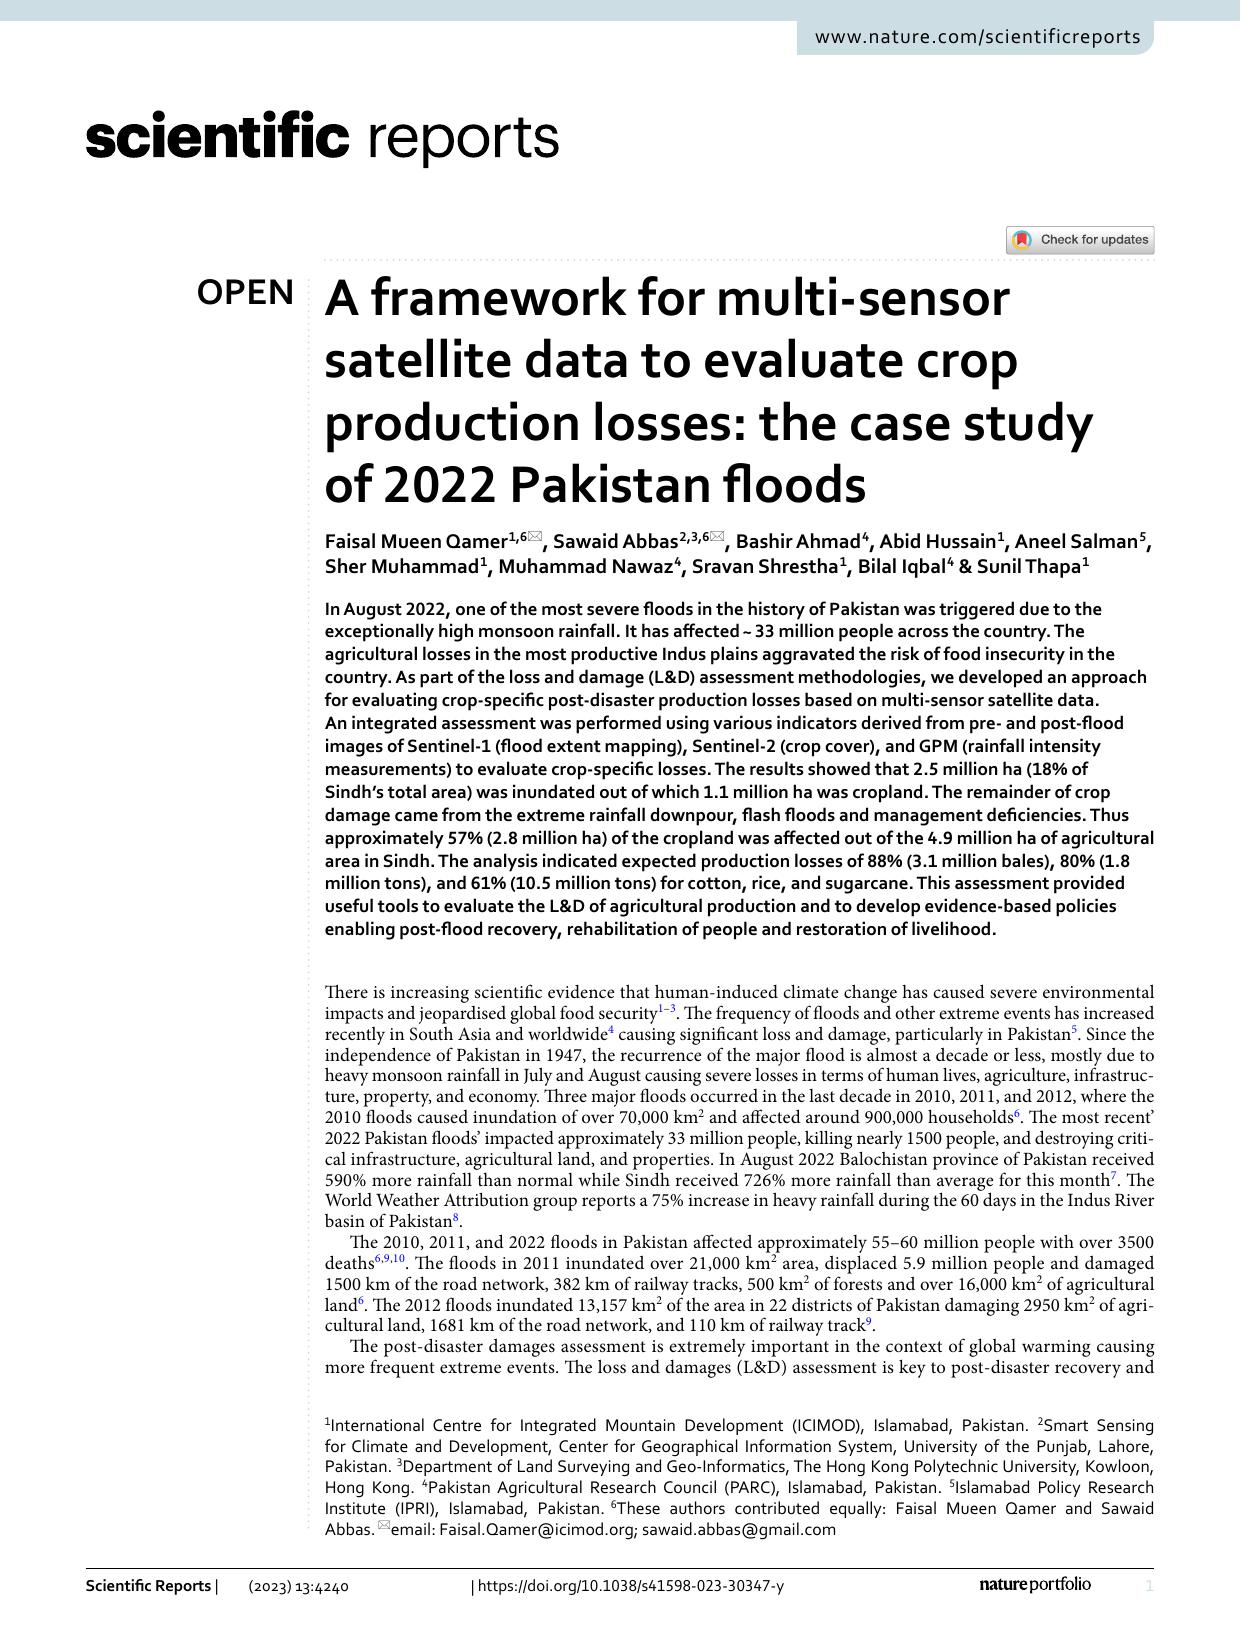 A framework for multi-sensor satellite data to evaluate crop production losses: the case study of 2022 Pakistan floods